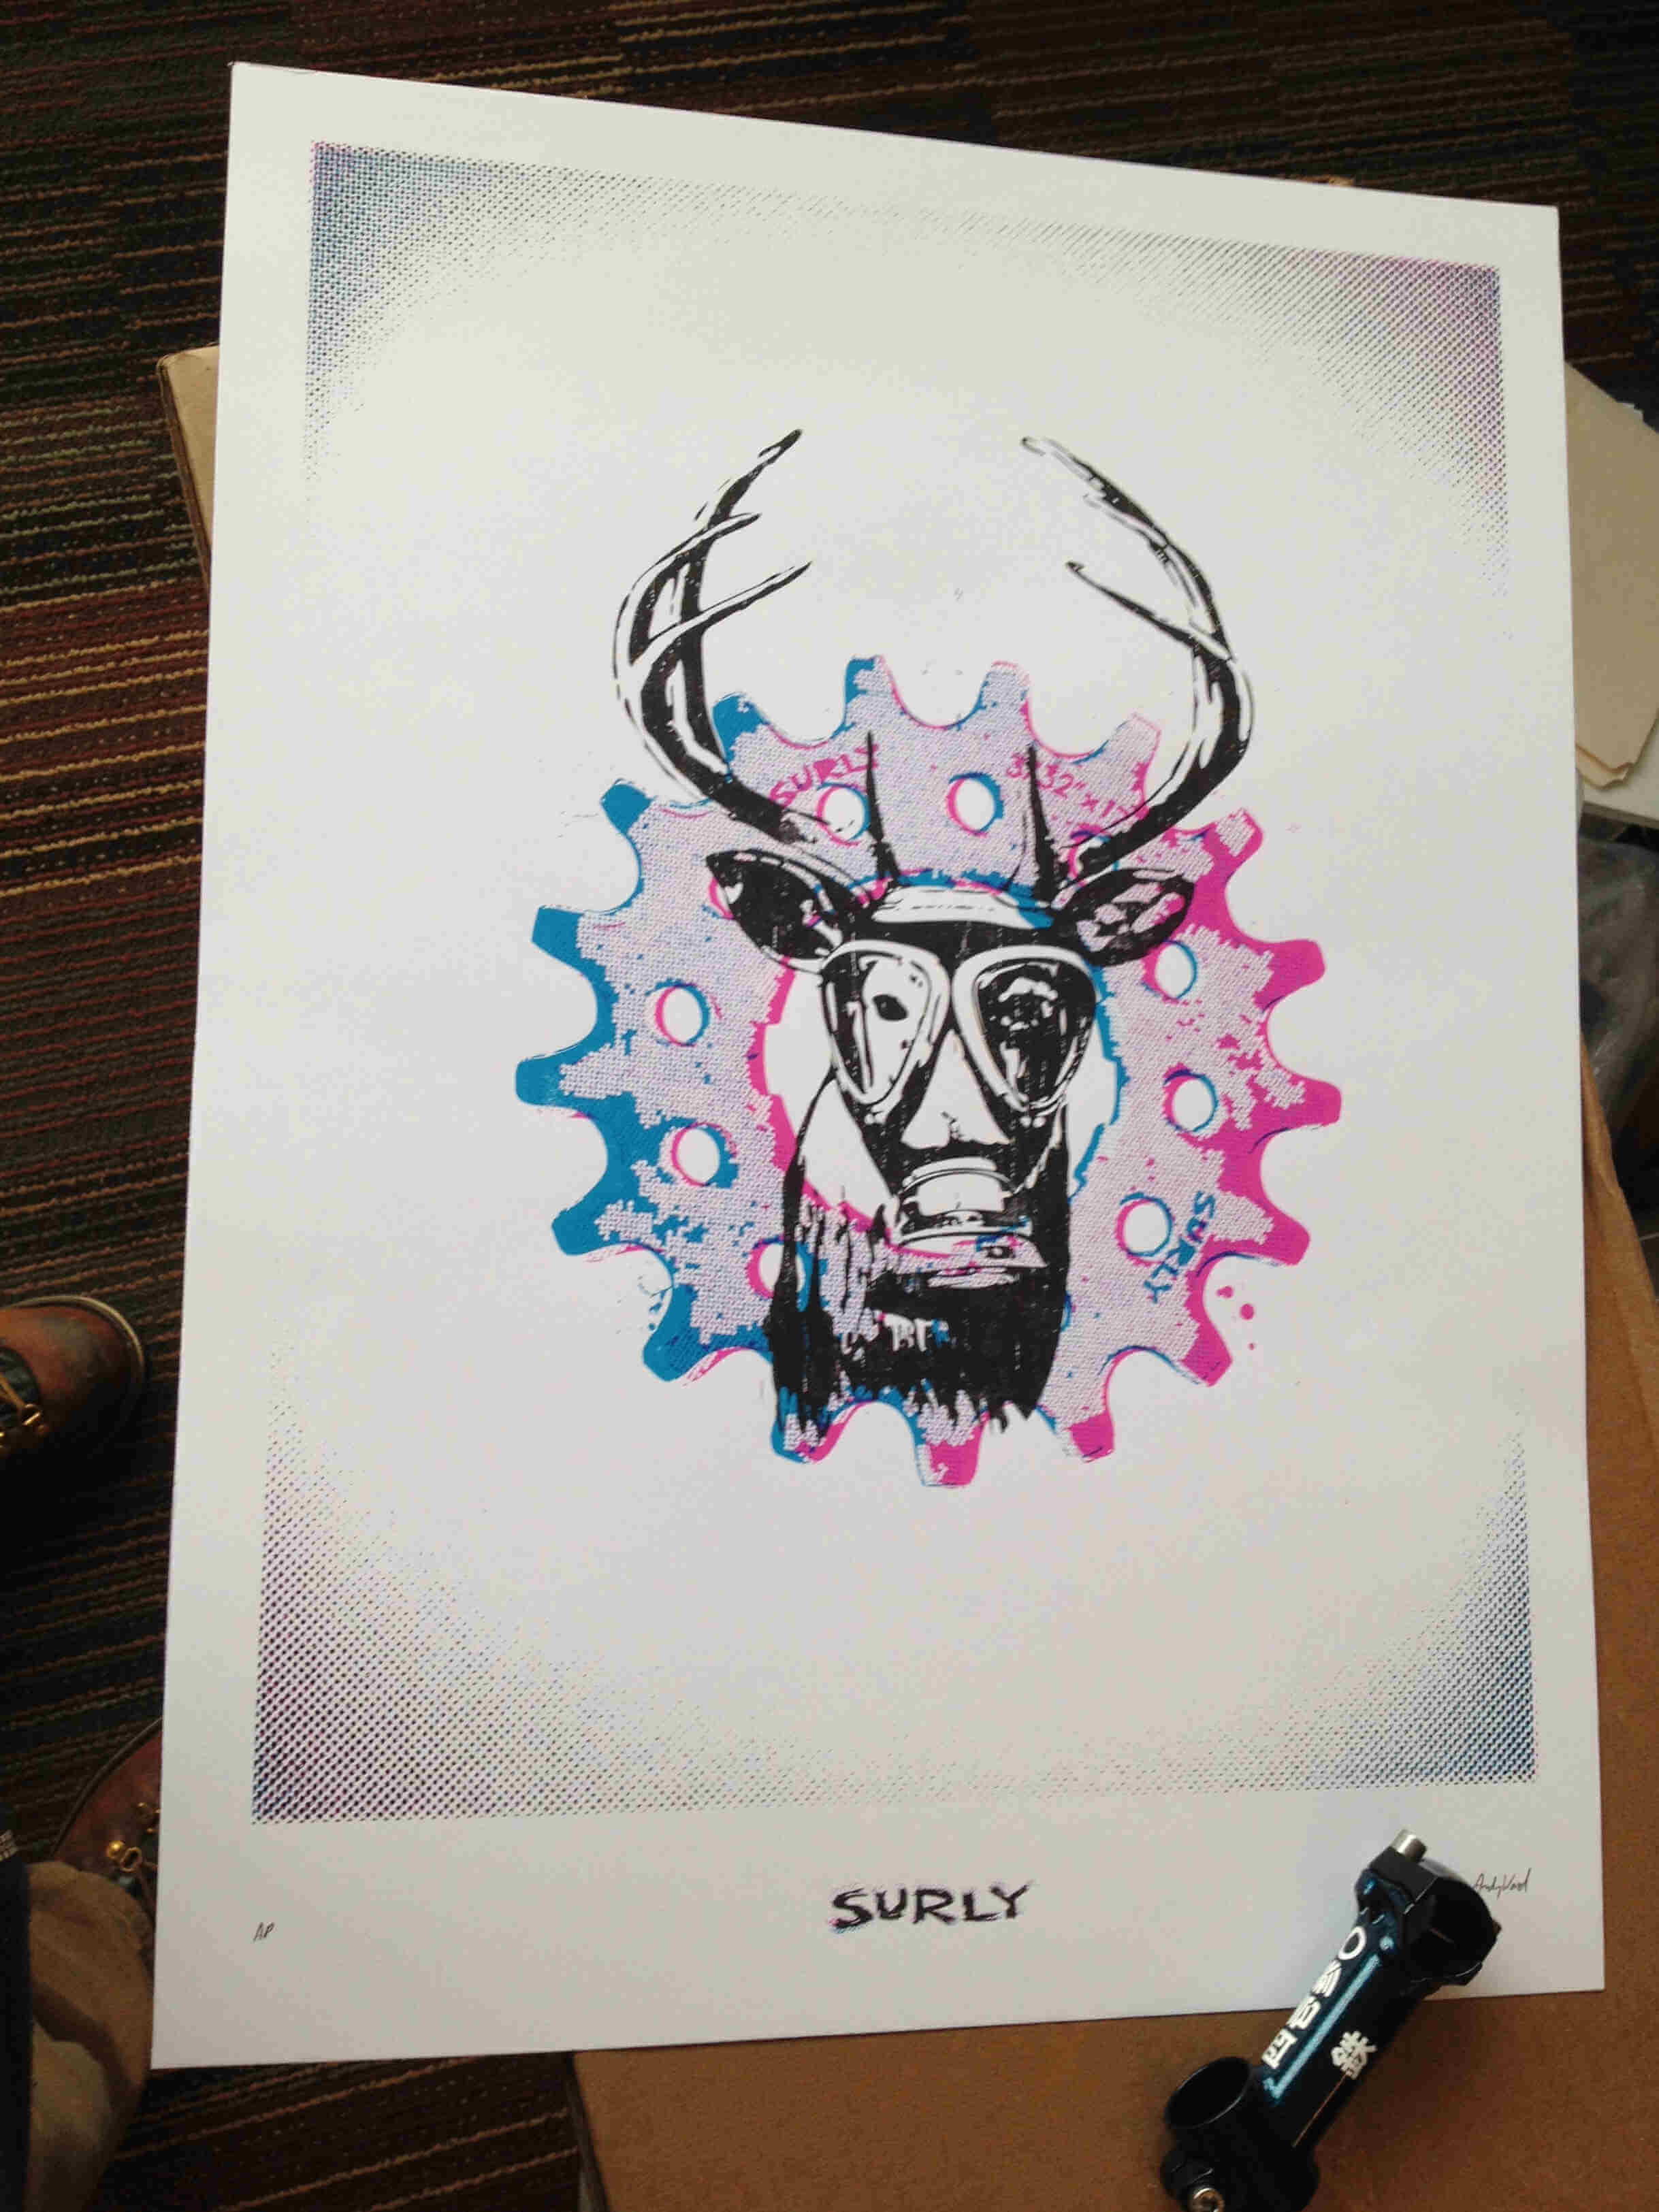 White paper with a colored graphic illustration of a deer with a gas mask, a bike gear, and a Surly Bikes logo on bottom